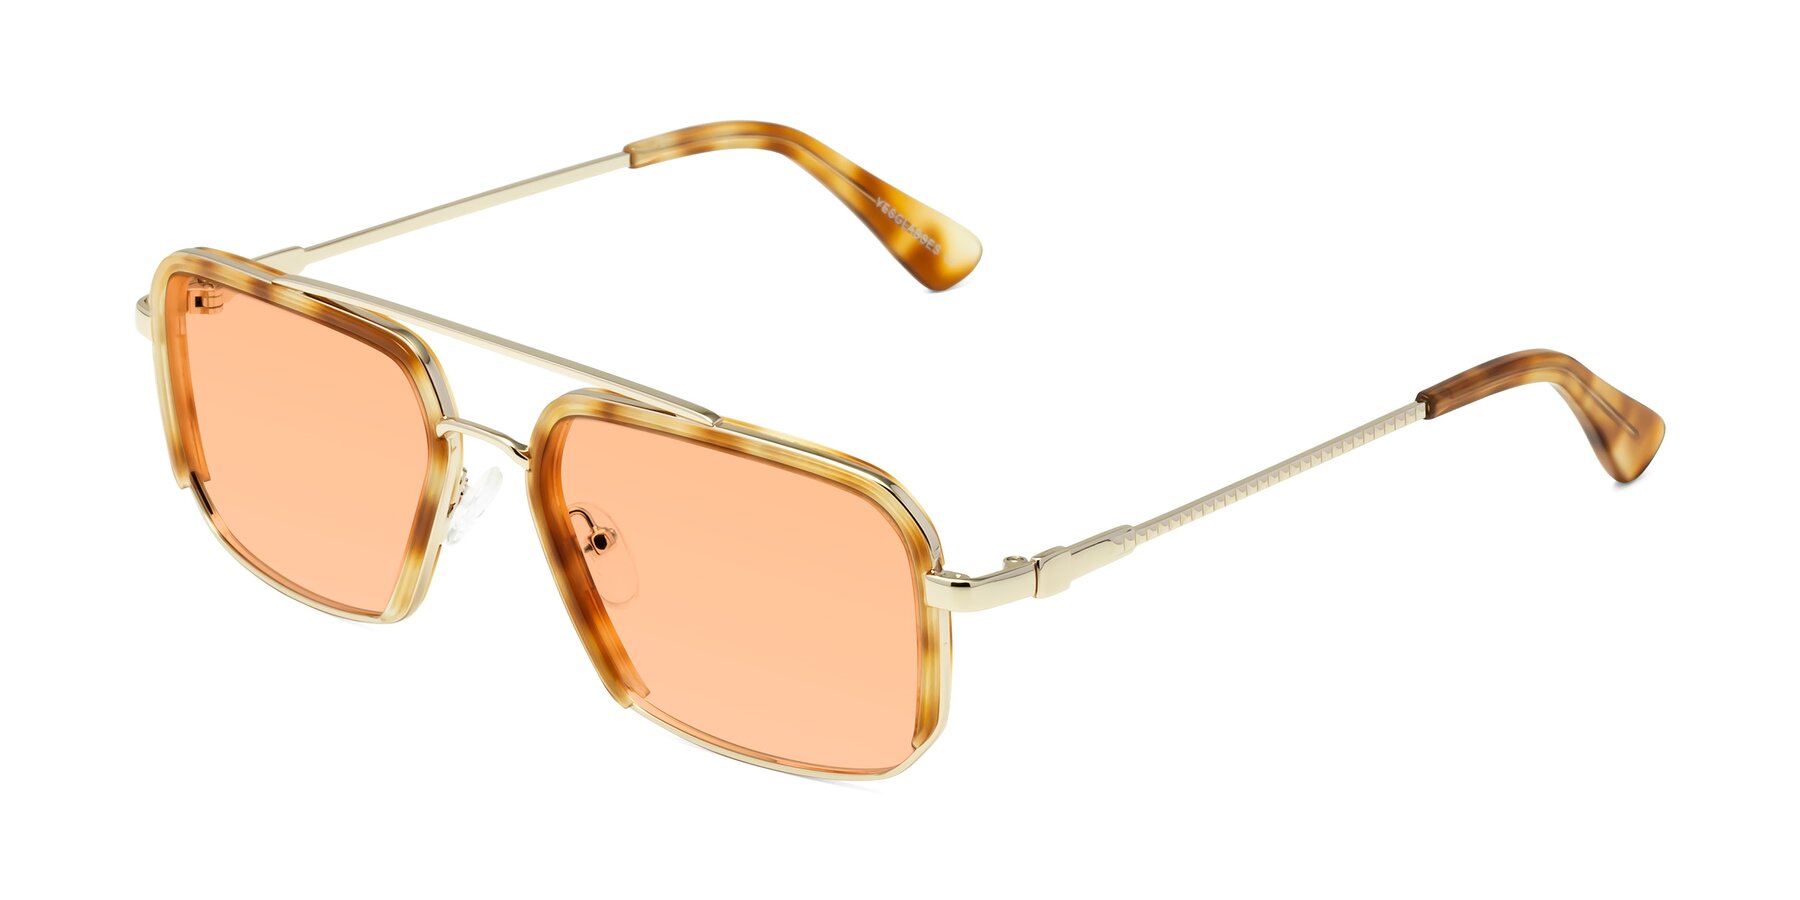 Angle of Dechter in Yellow Tortoise-Gold with Light Orange Tinted Lenses